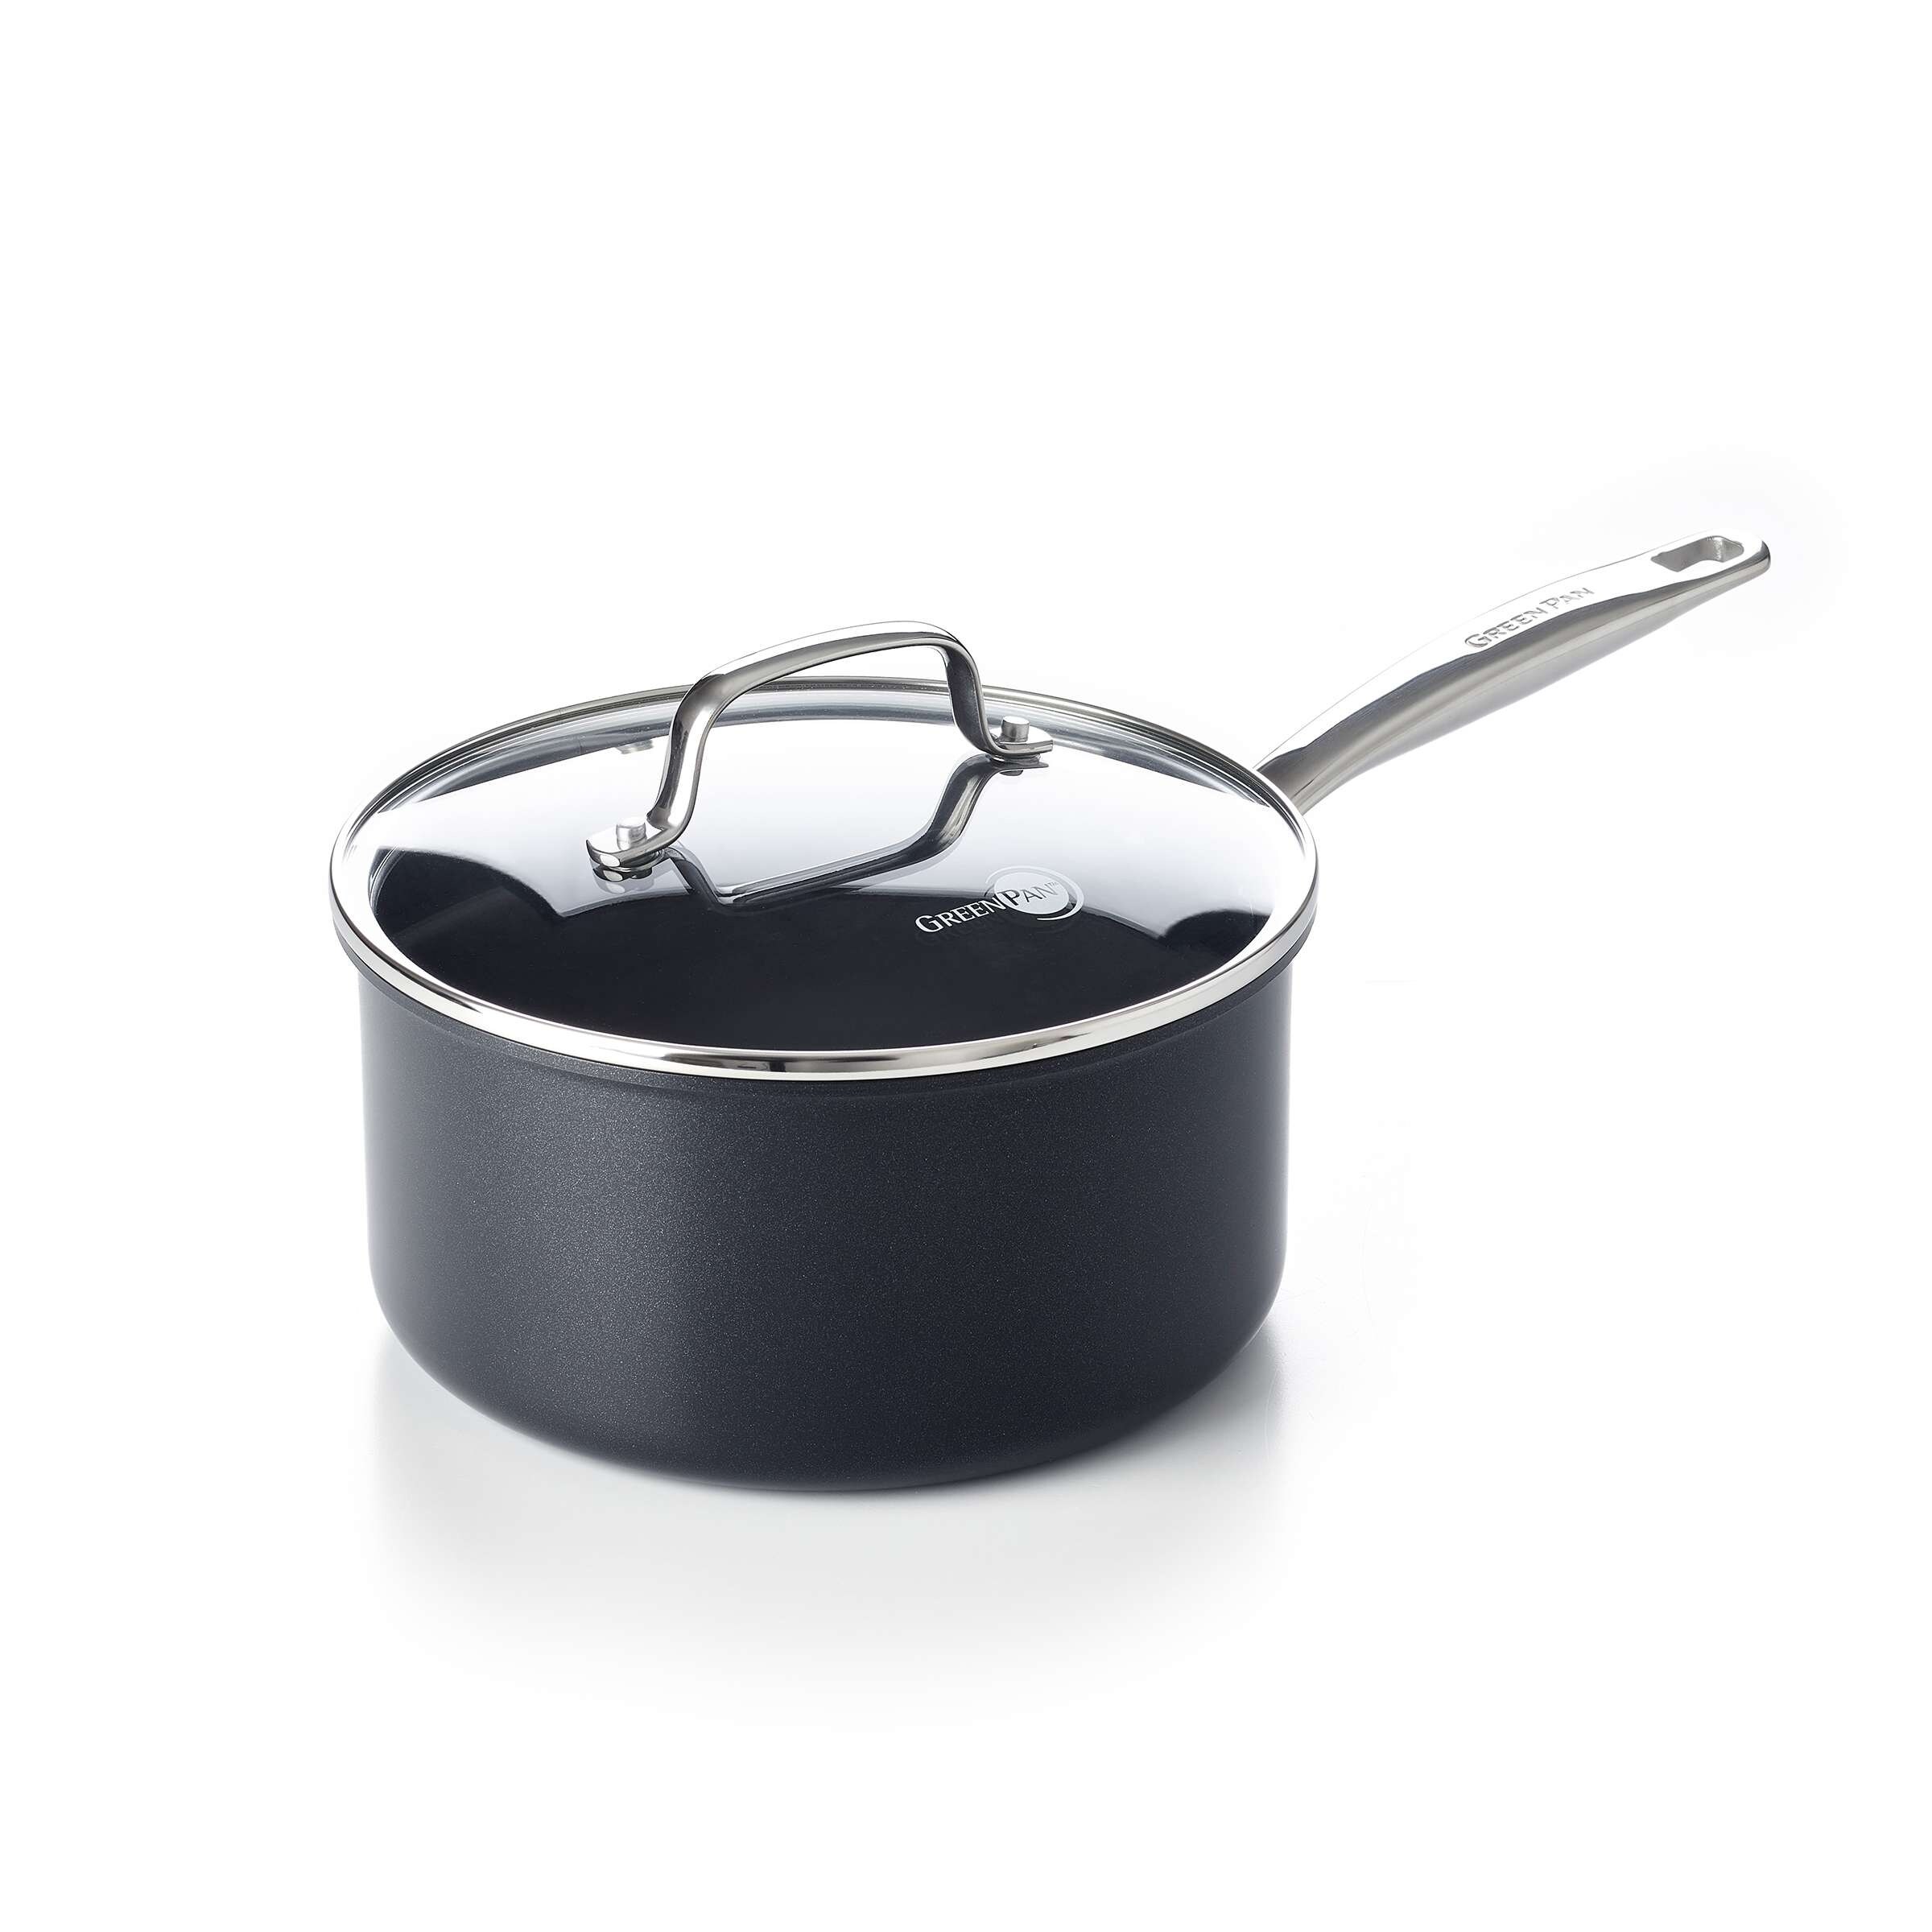 https://ak1.ostkcdn.com/images/products/is/images/direct/db194f87ff004781a9820545df29975552578d27/GreenPan-Prime-Midnight-3qt-Covered-Sauce-Pan.jpg